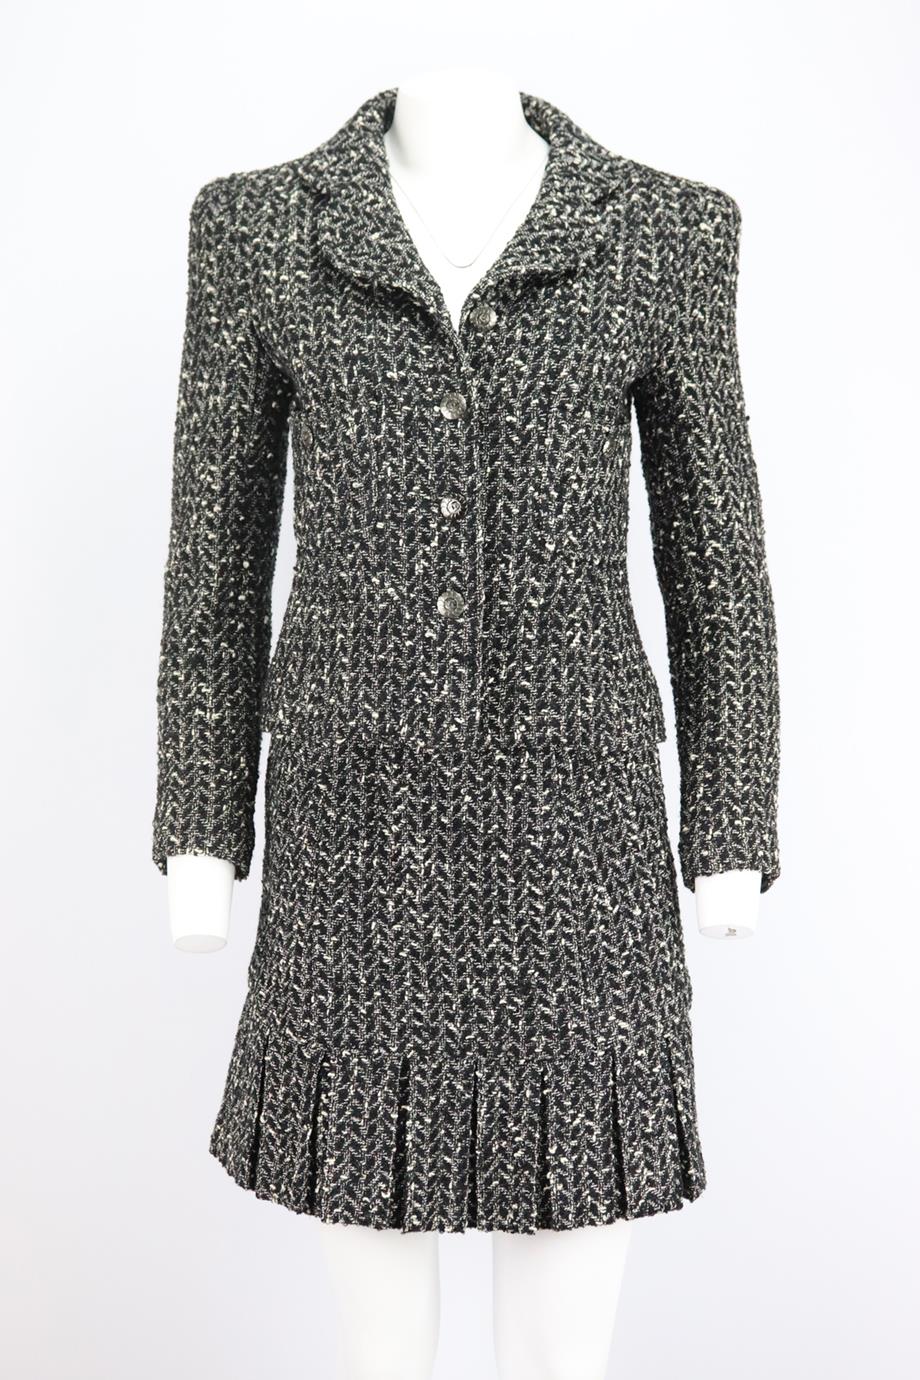 SLFMag — 1960's classic Chanel tweed mini skirt-suits and